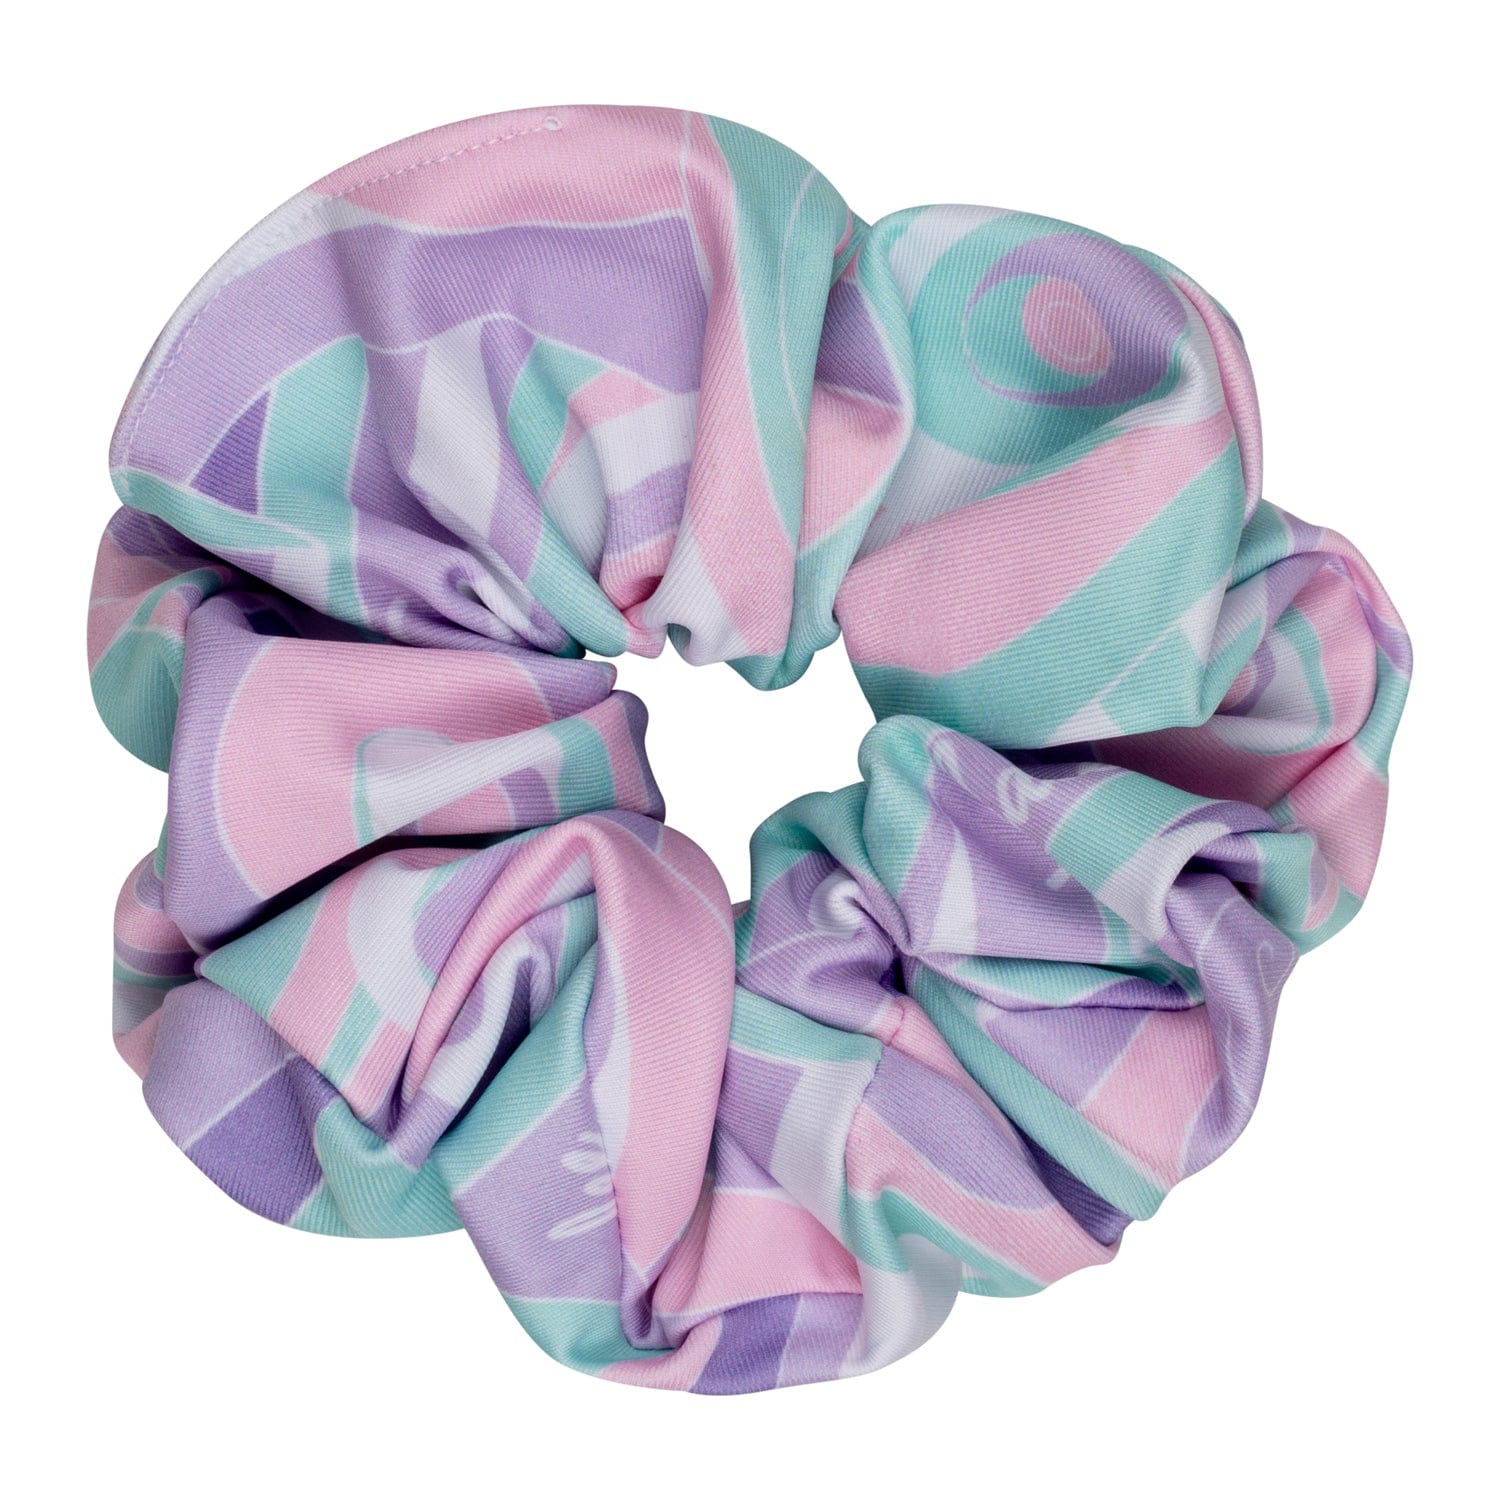 A DEE - Nia Popping Pastels Scrunchie - Lilac